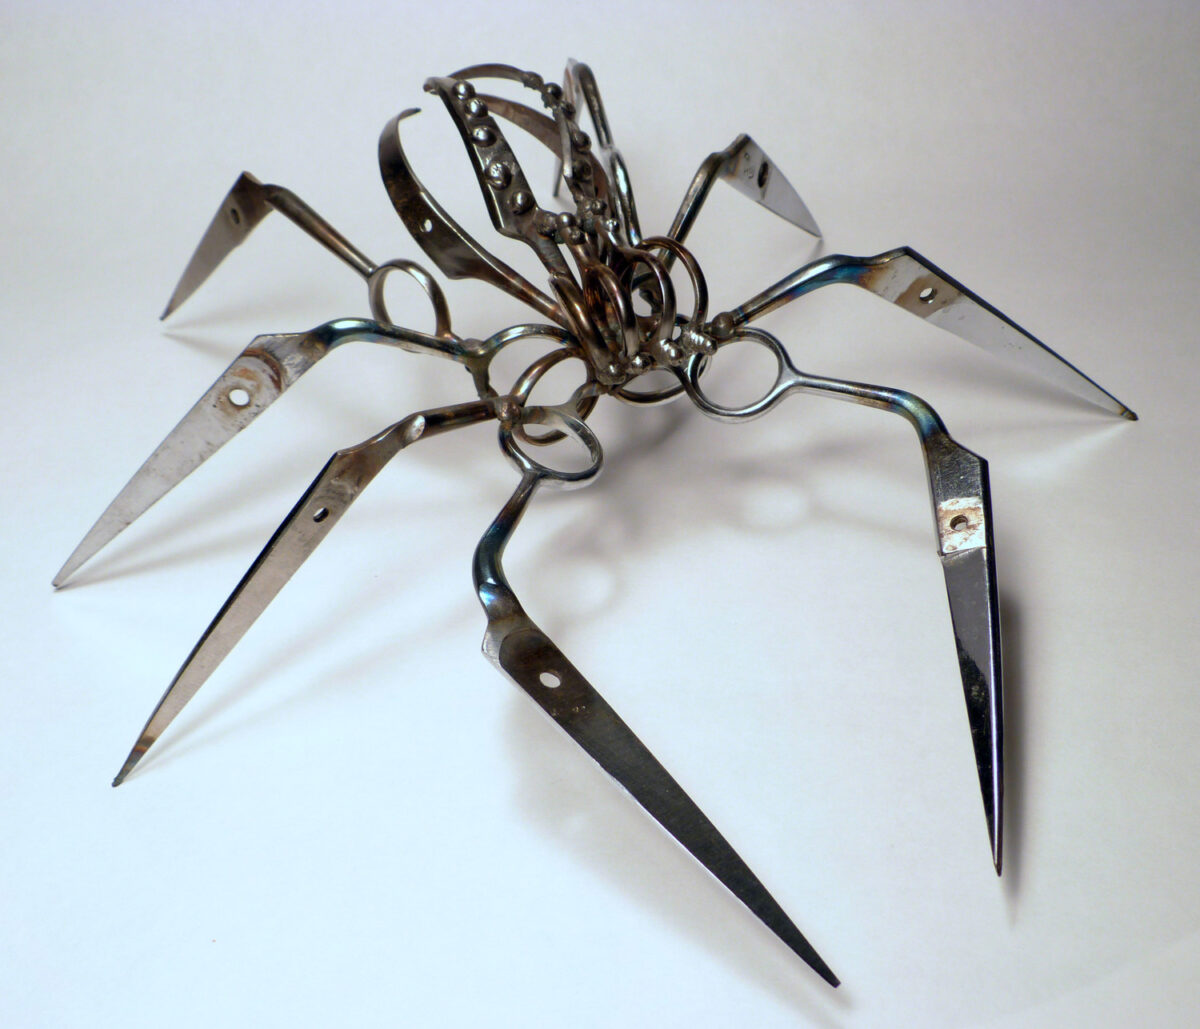 Scissors Confiscated By The Tsa Transformed Into Amazing Spider Sculptures By Christopher Locke (1)